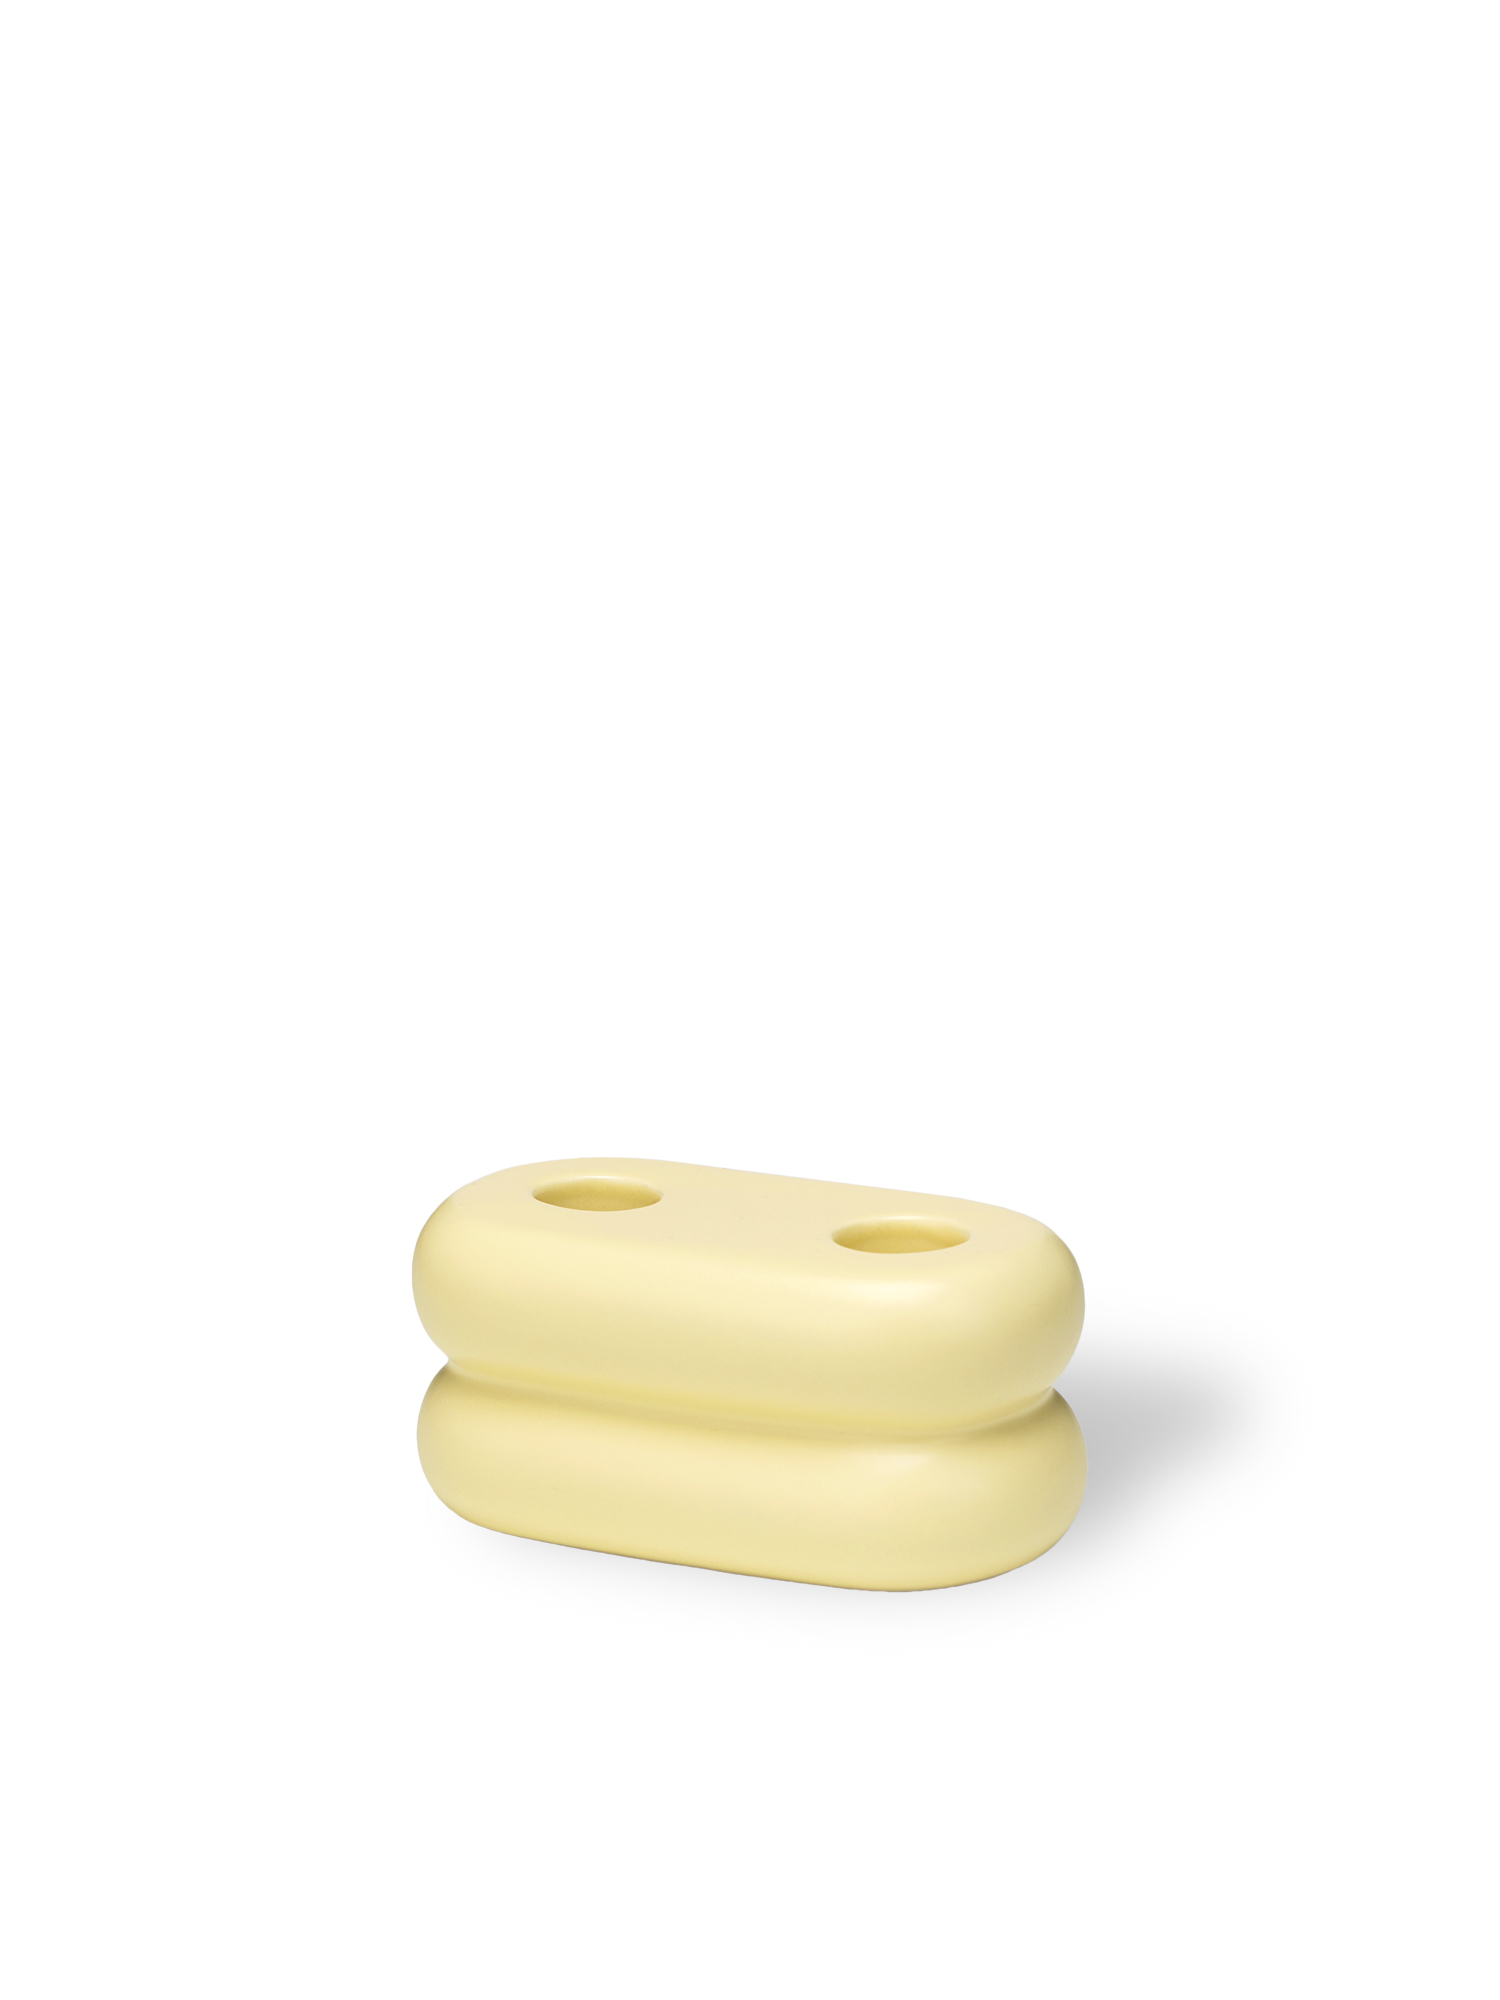 stences-candleholder-repeat-soft-yellow